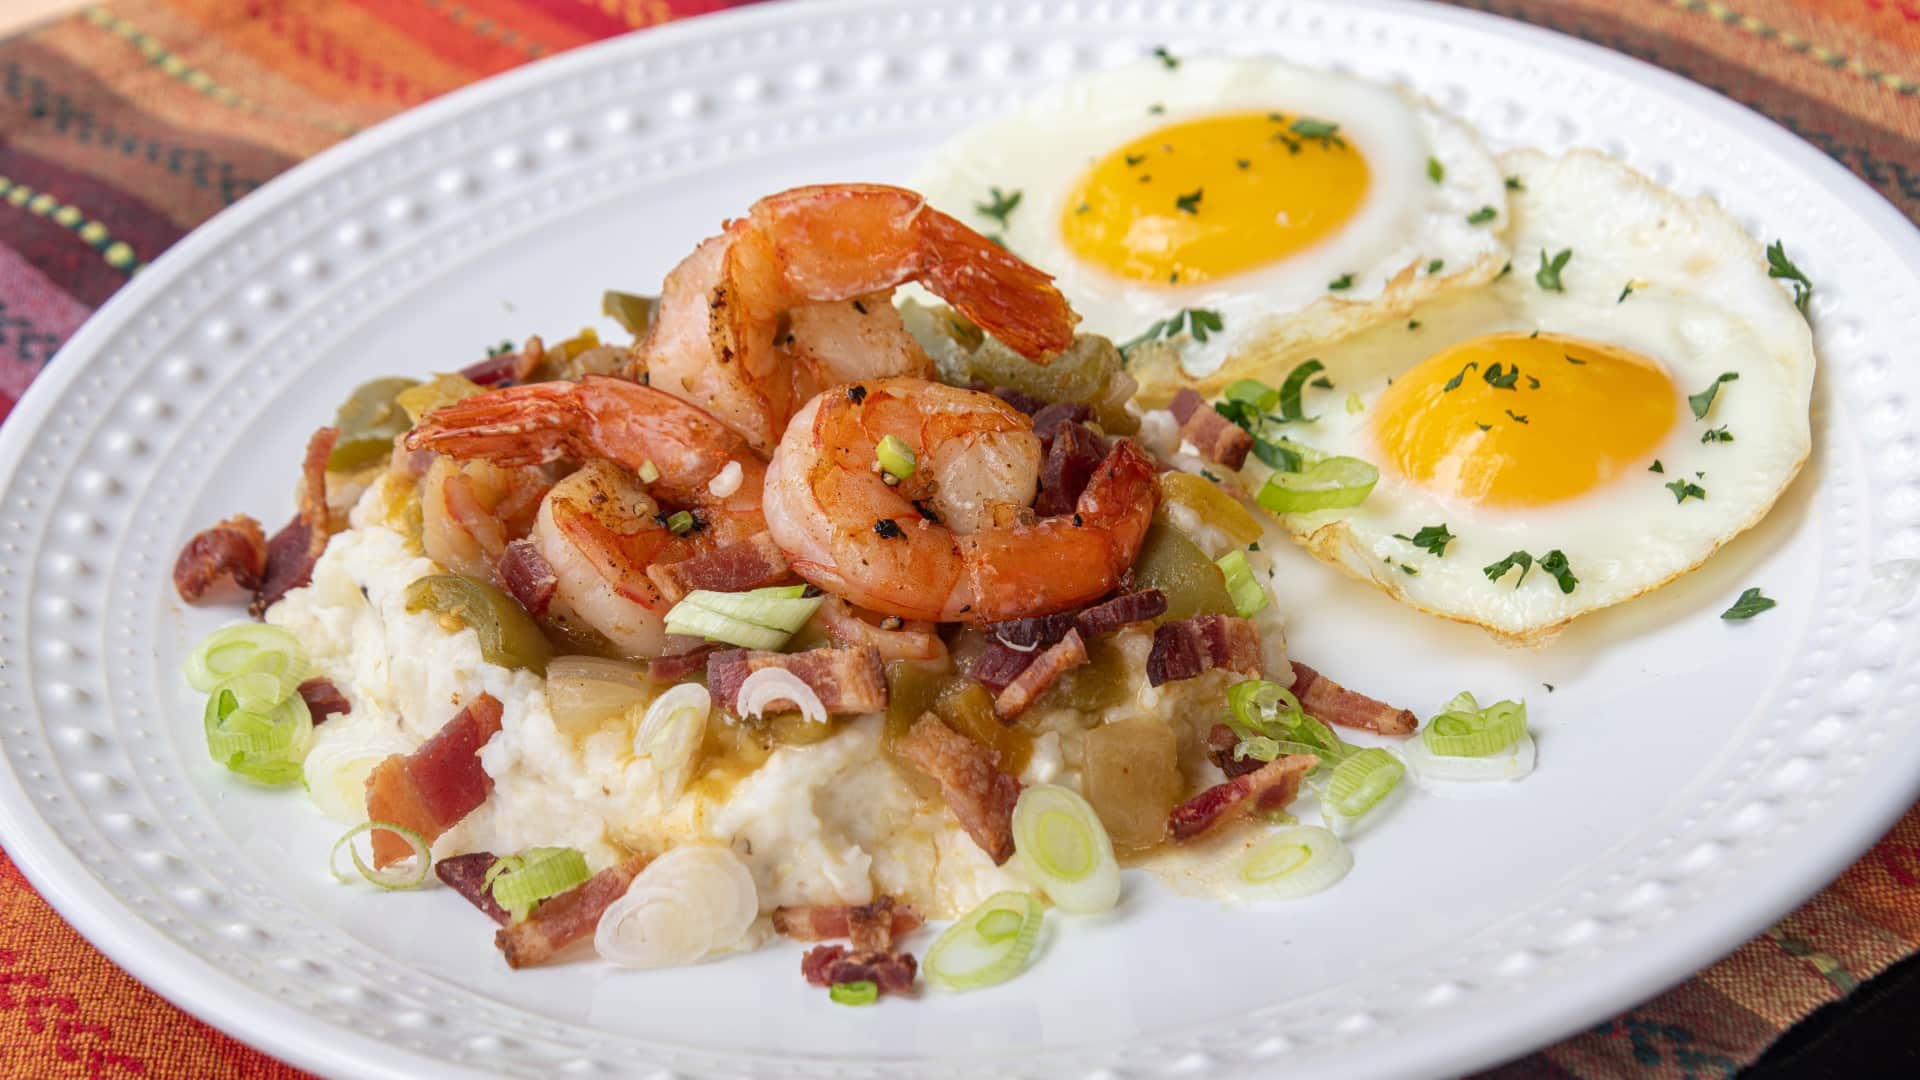 Plate of grits topped with green chile shrimp sauce, shrimp, bacon bits, green onion, and a side of eggs.